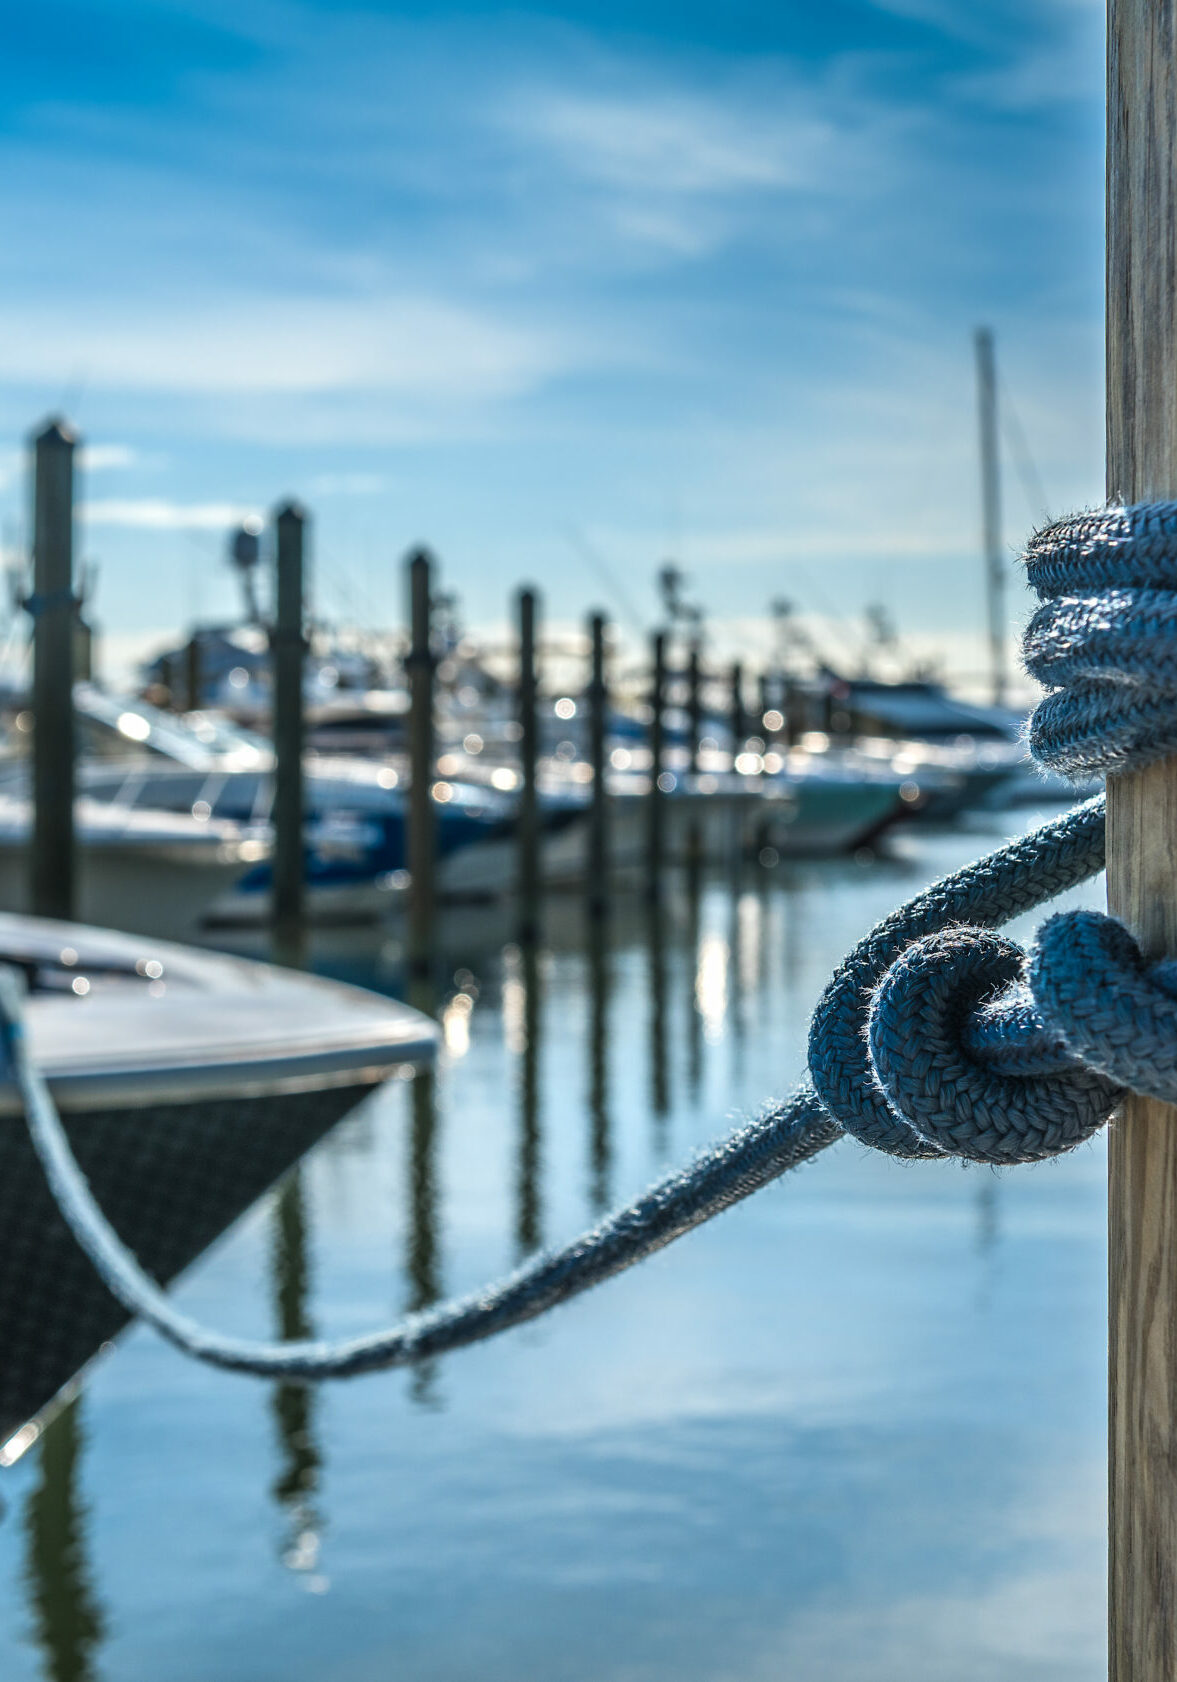 Secure mooring for boats in a quiet marina.